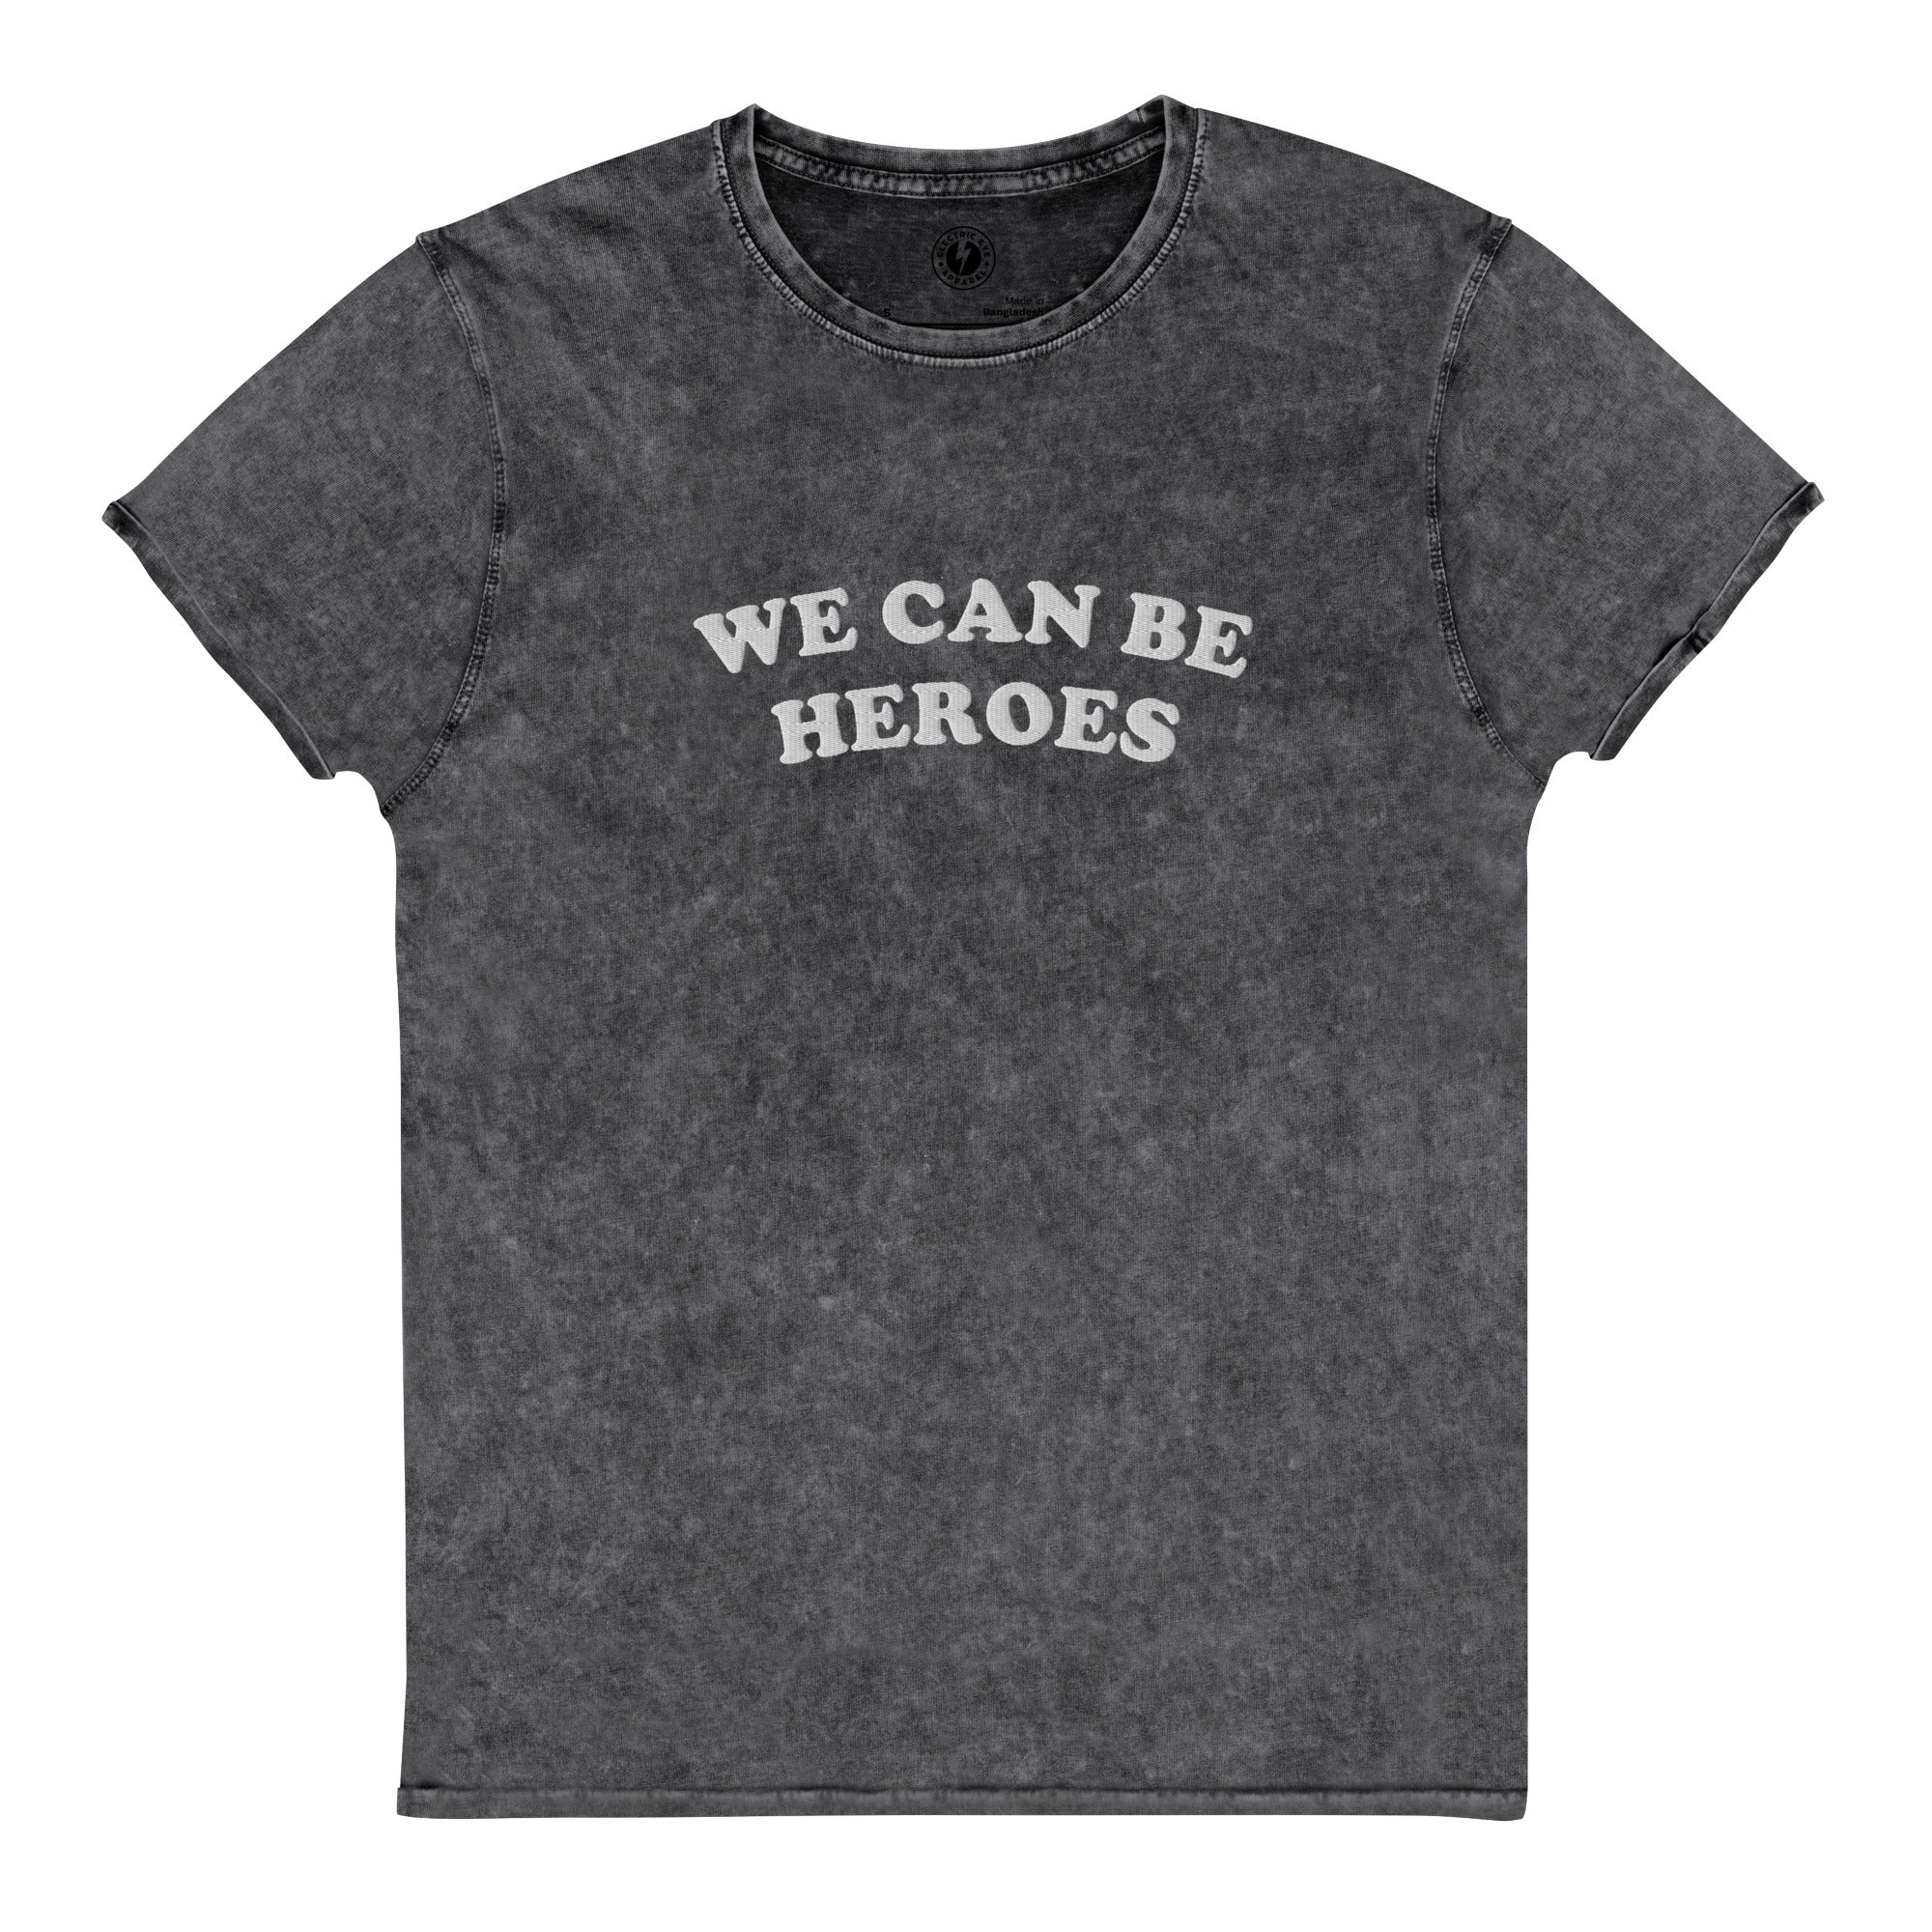 WE CAN BE HEROES Embroidered Vintage Aged Denim Style Unisex T-Shirt